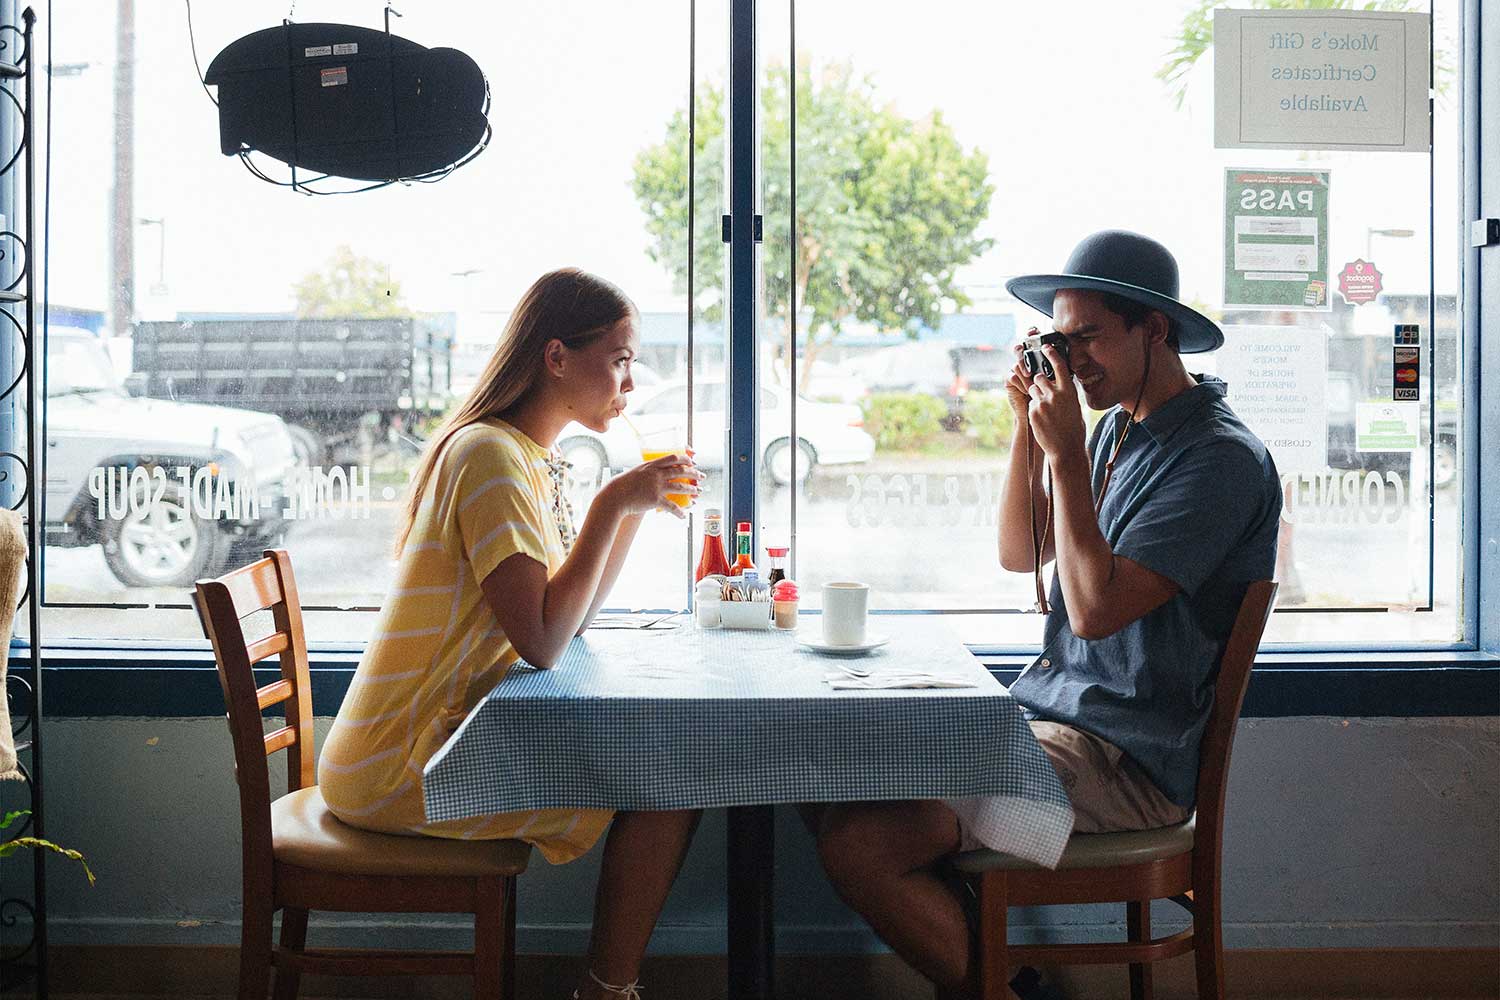 woman sitting at table drinking through a straw and man sitting across table taking her photo with a camera